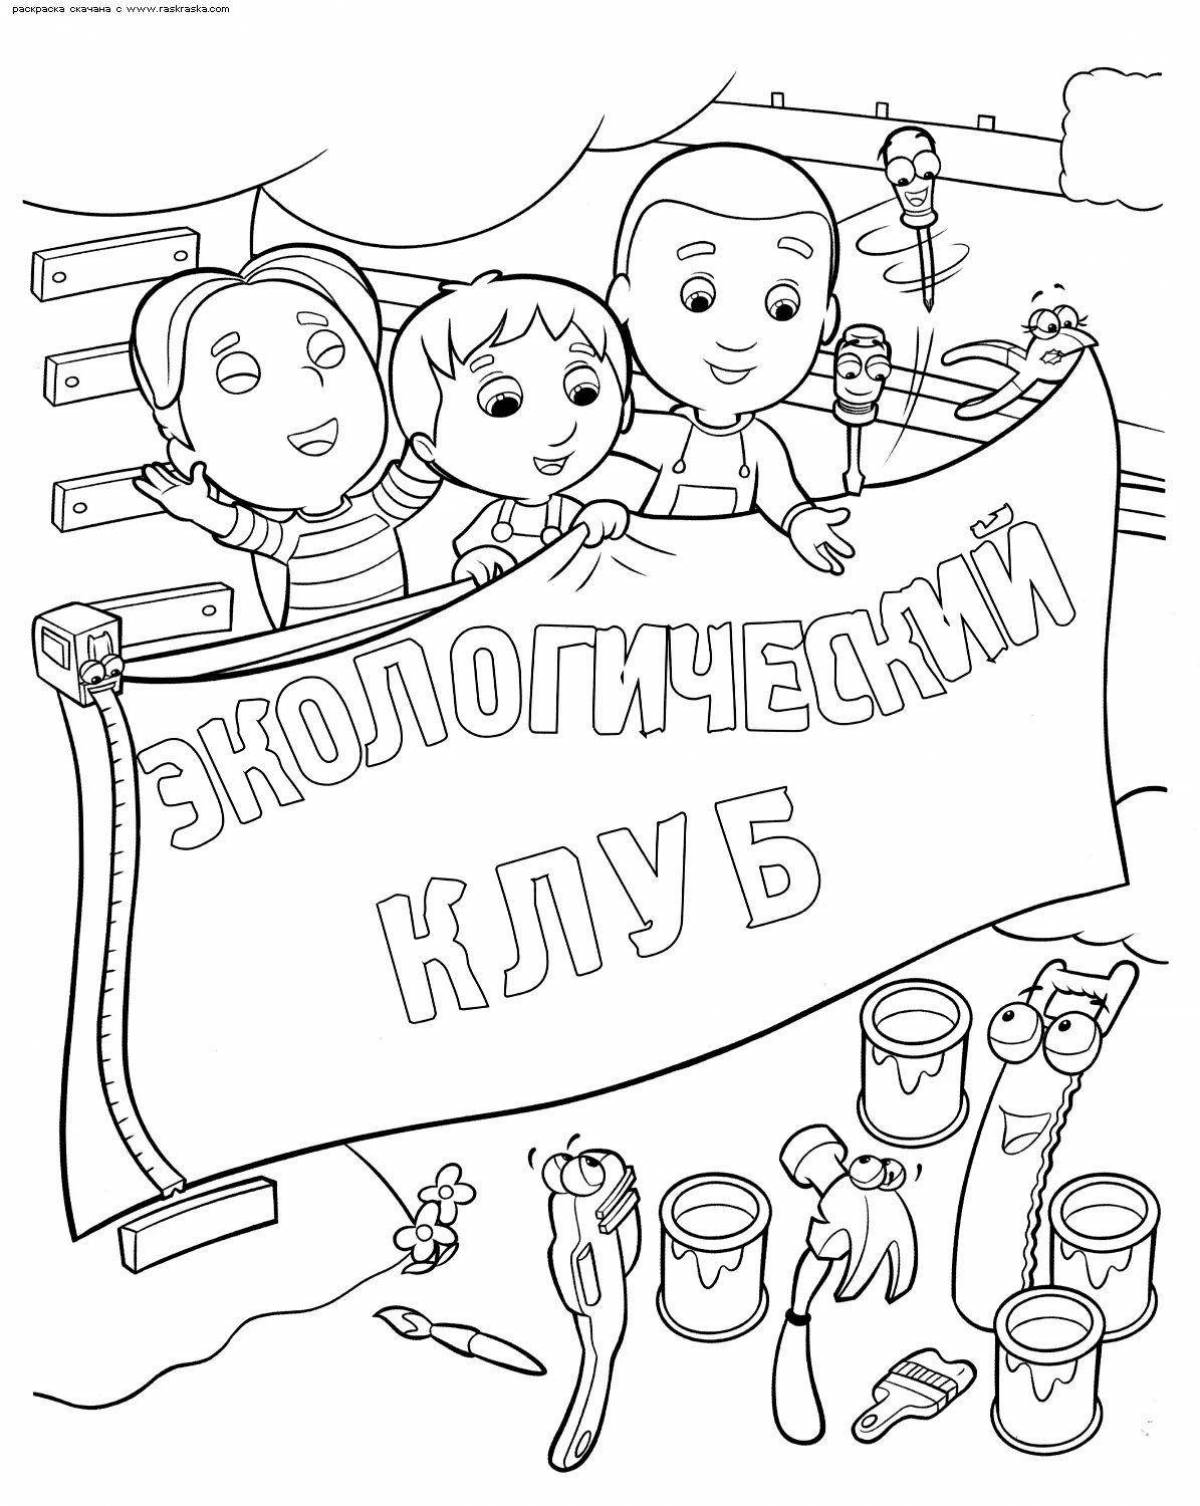 Great theater poster coloring page